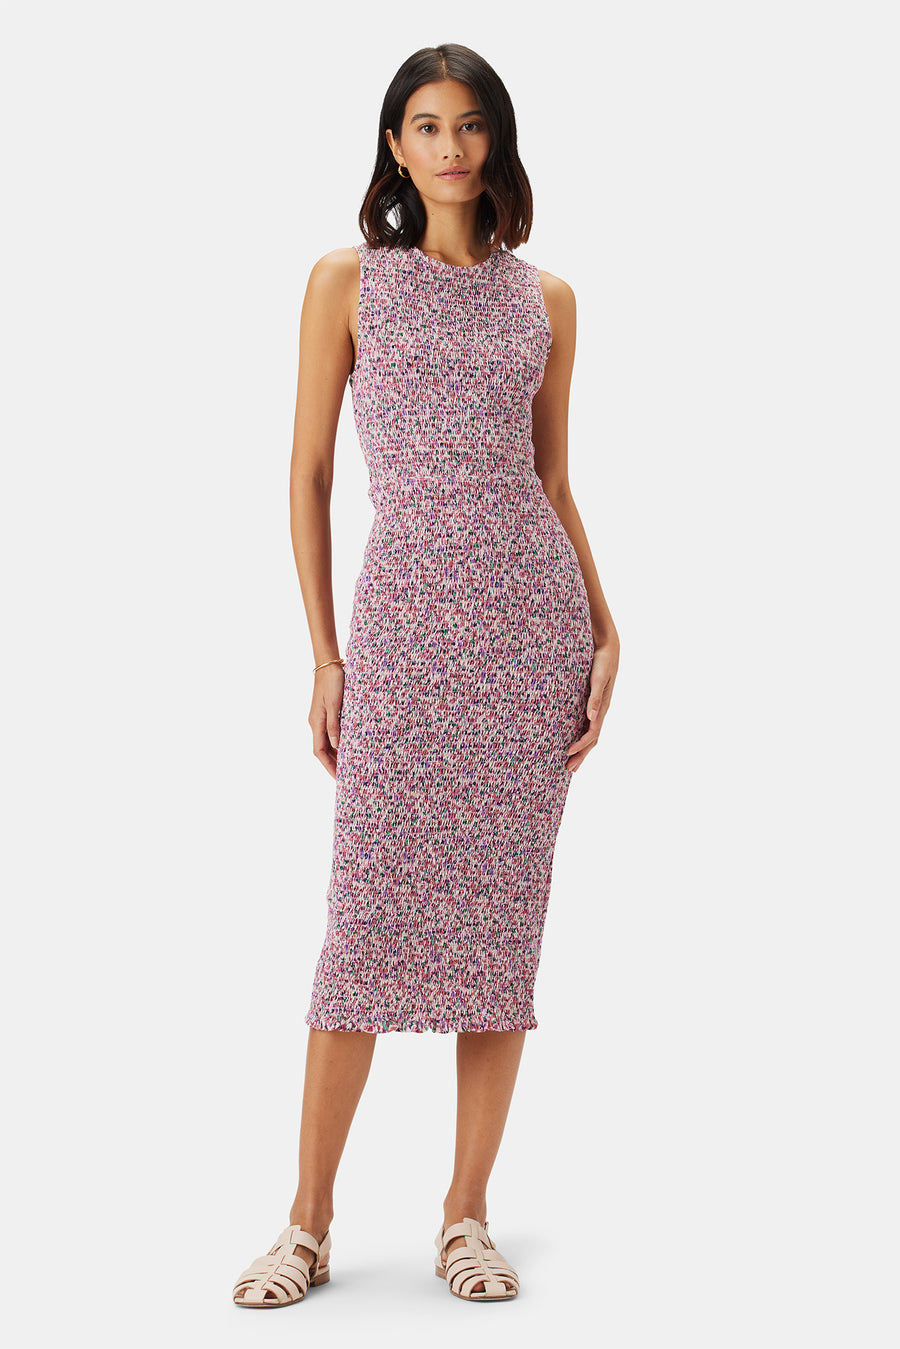 Isabella Dress - Alessia Mulberry